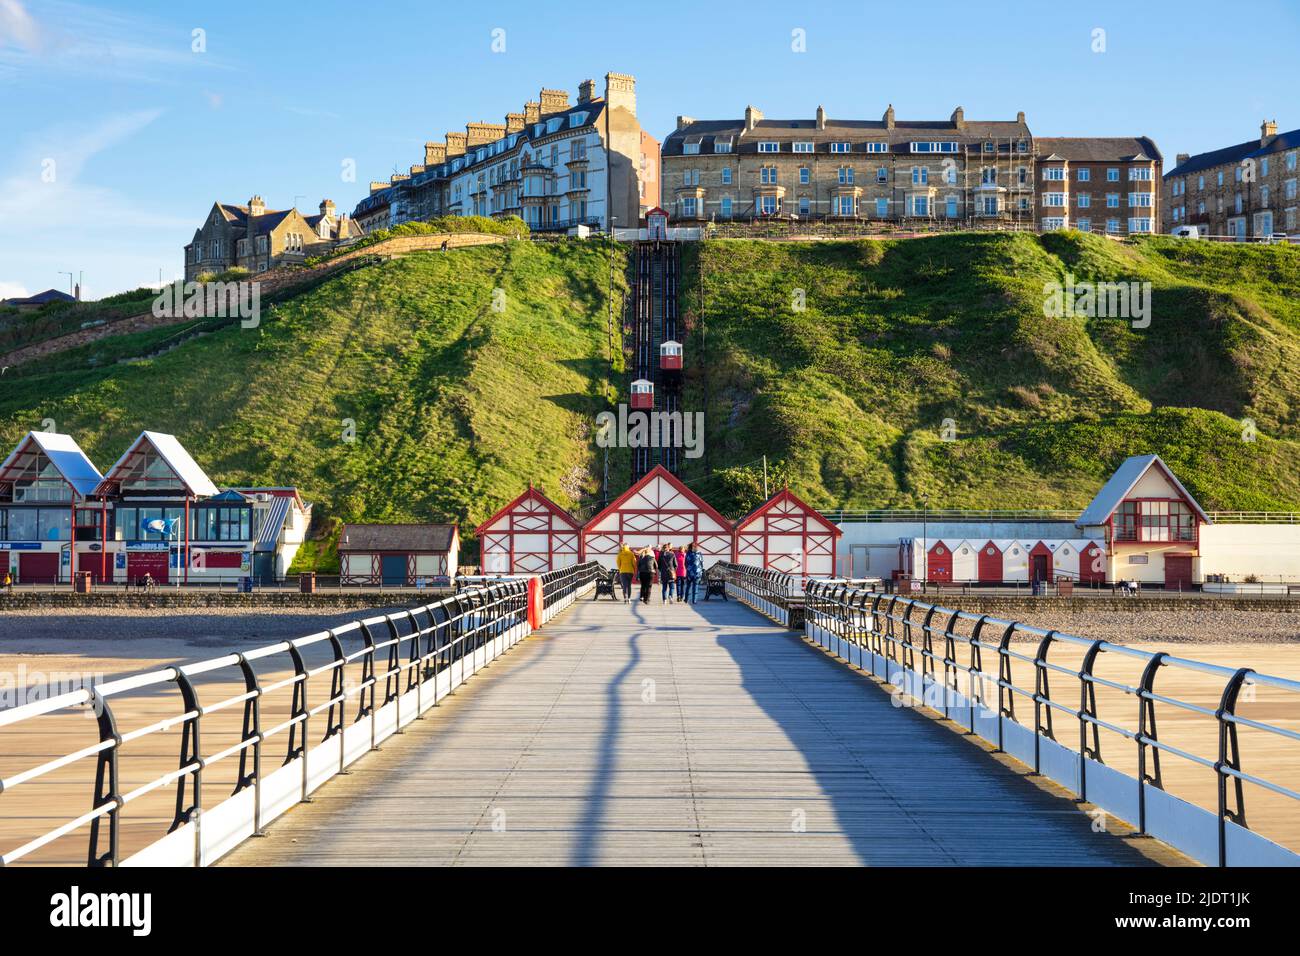 Saltburn by the sea yorkshire england Saltburn pier victorian pier and sandy beach saltburn town redcar cleveland North Yorkshire England UK GB Europe Stock Photo